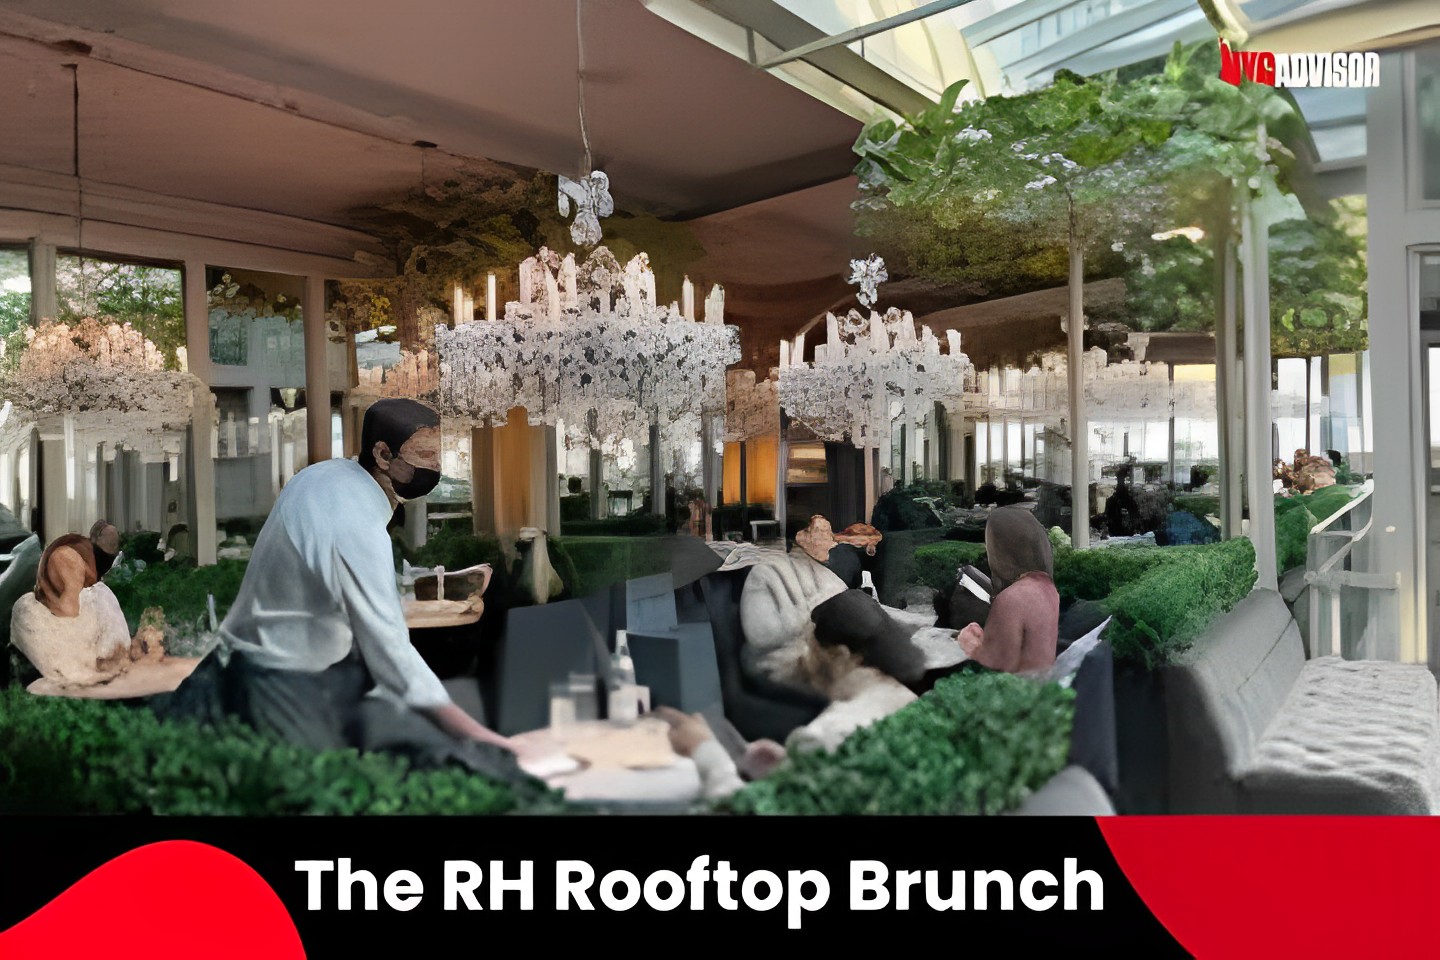 The RH Rooftop Brunch in NYC